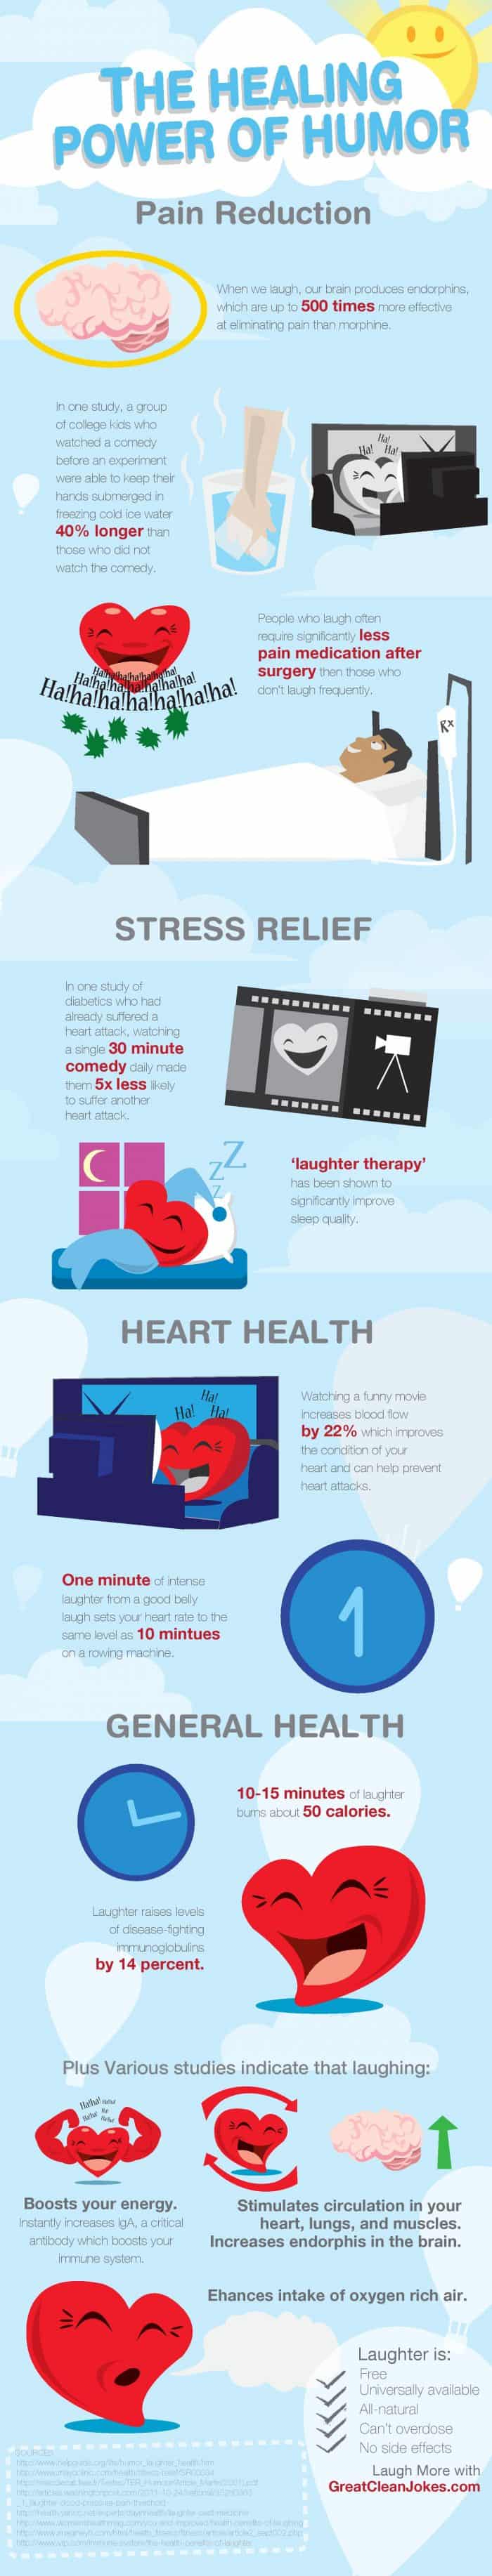 How laughter can be beneficial to your health